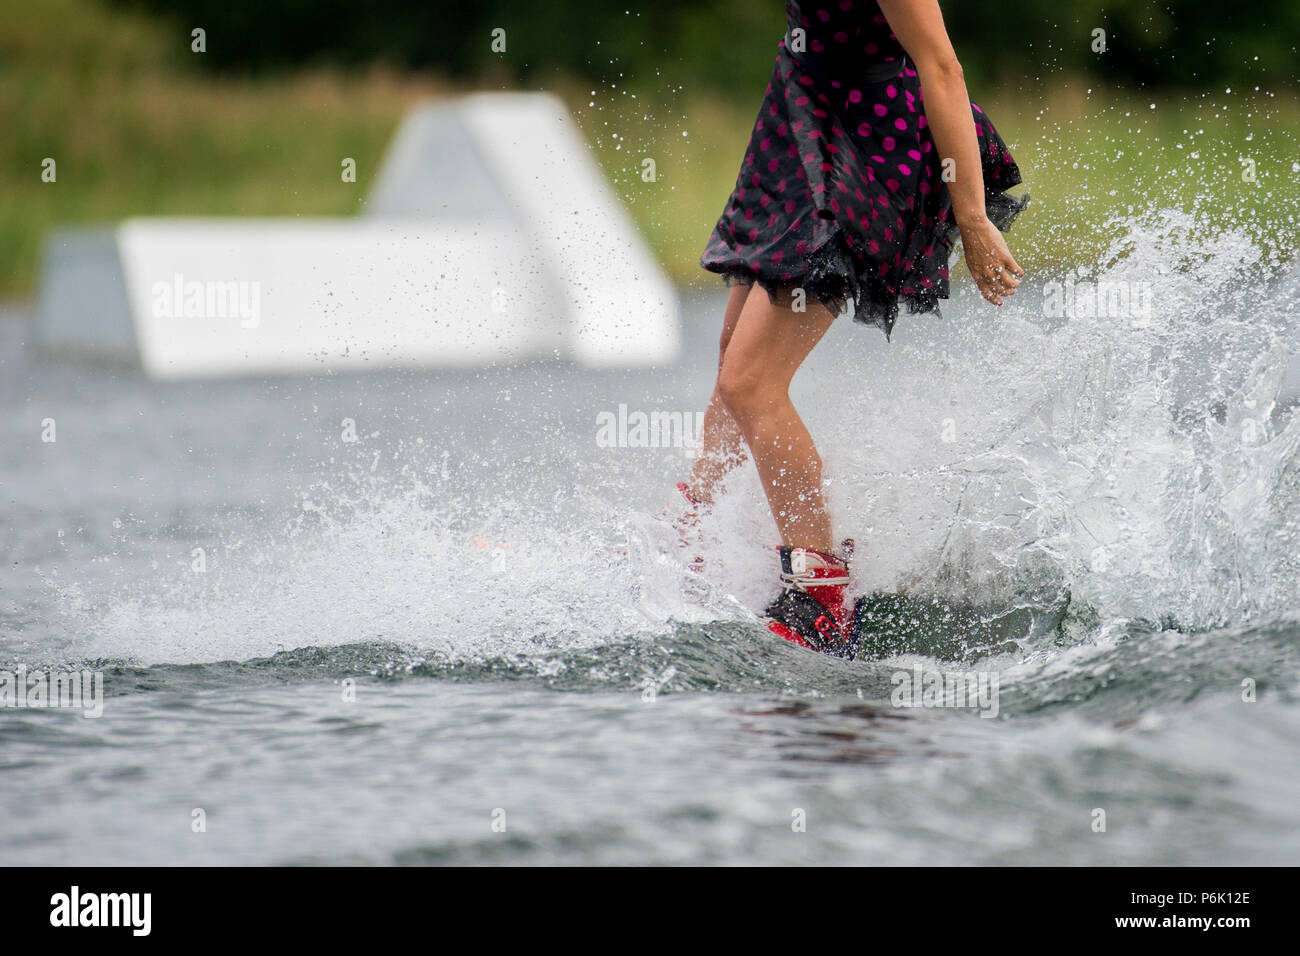 Woman in a skirt on a water ski is engaged in extreme sports. Wakeboard sport and girl. Stock Photo